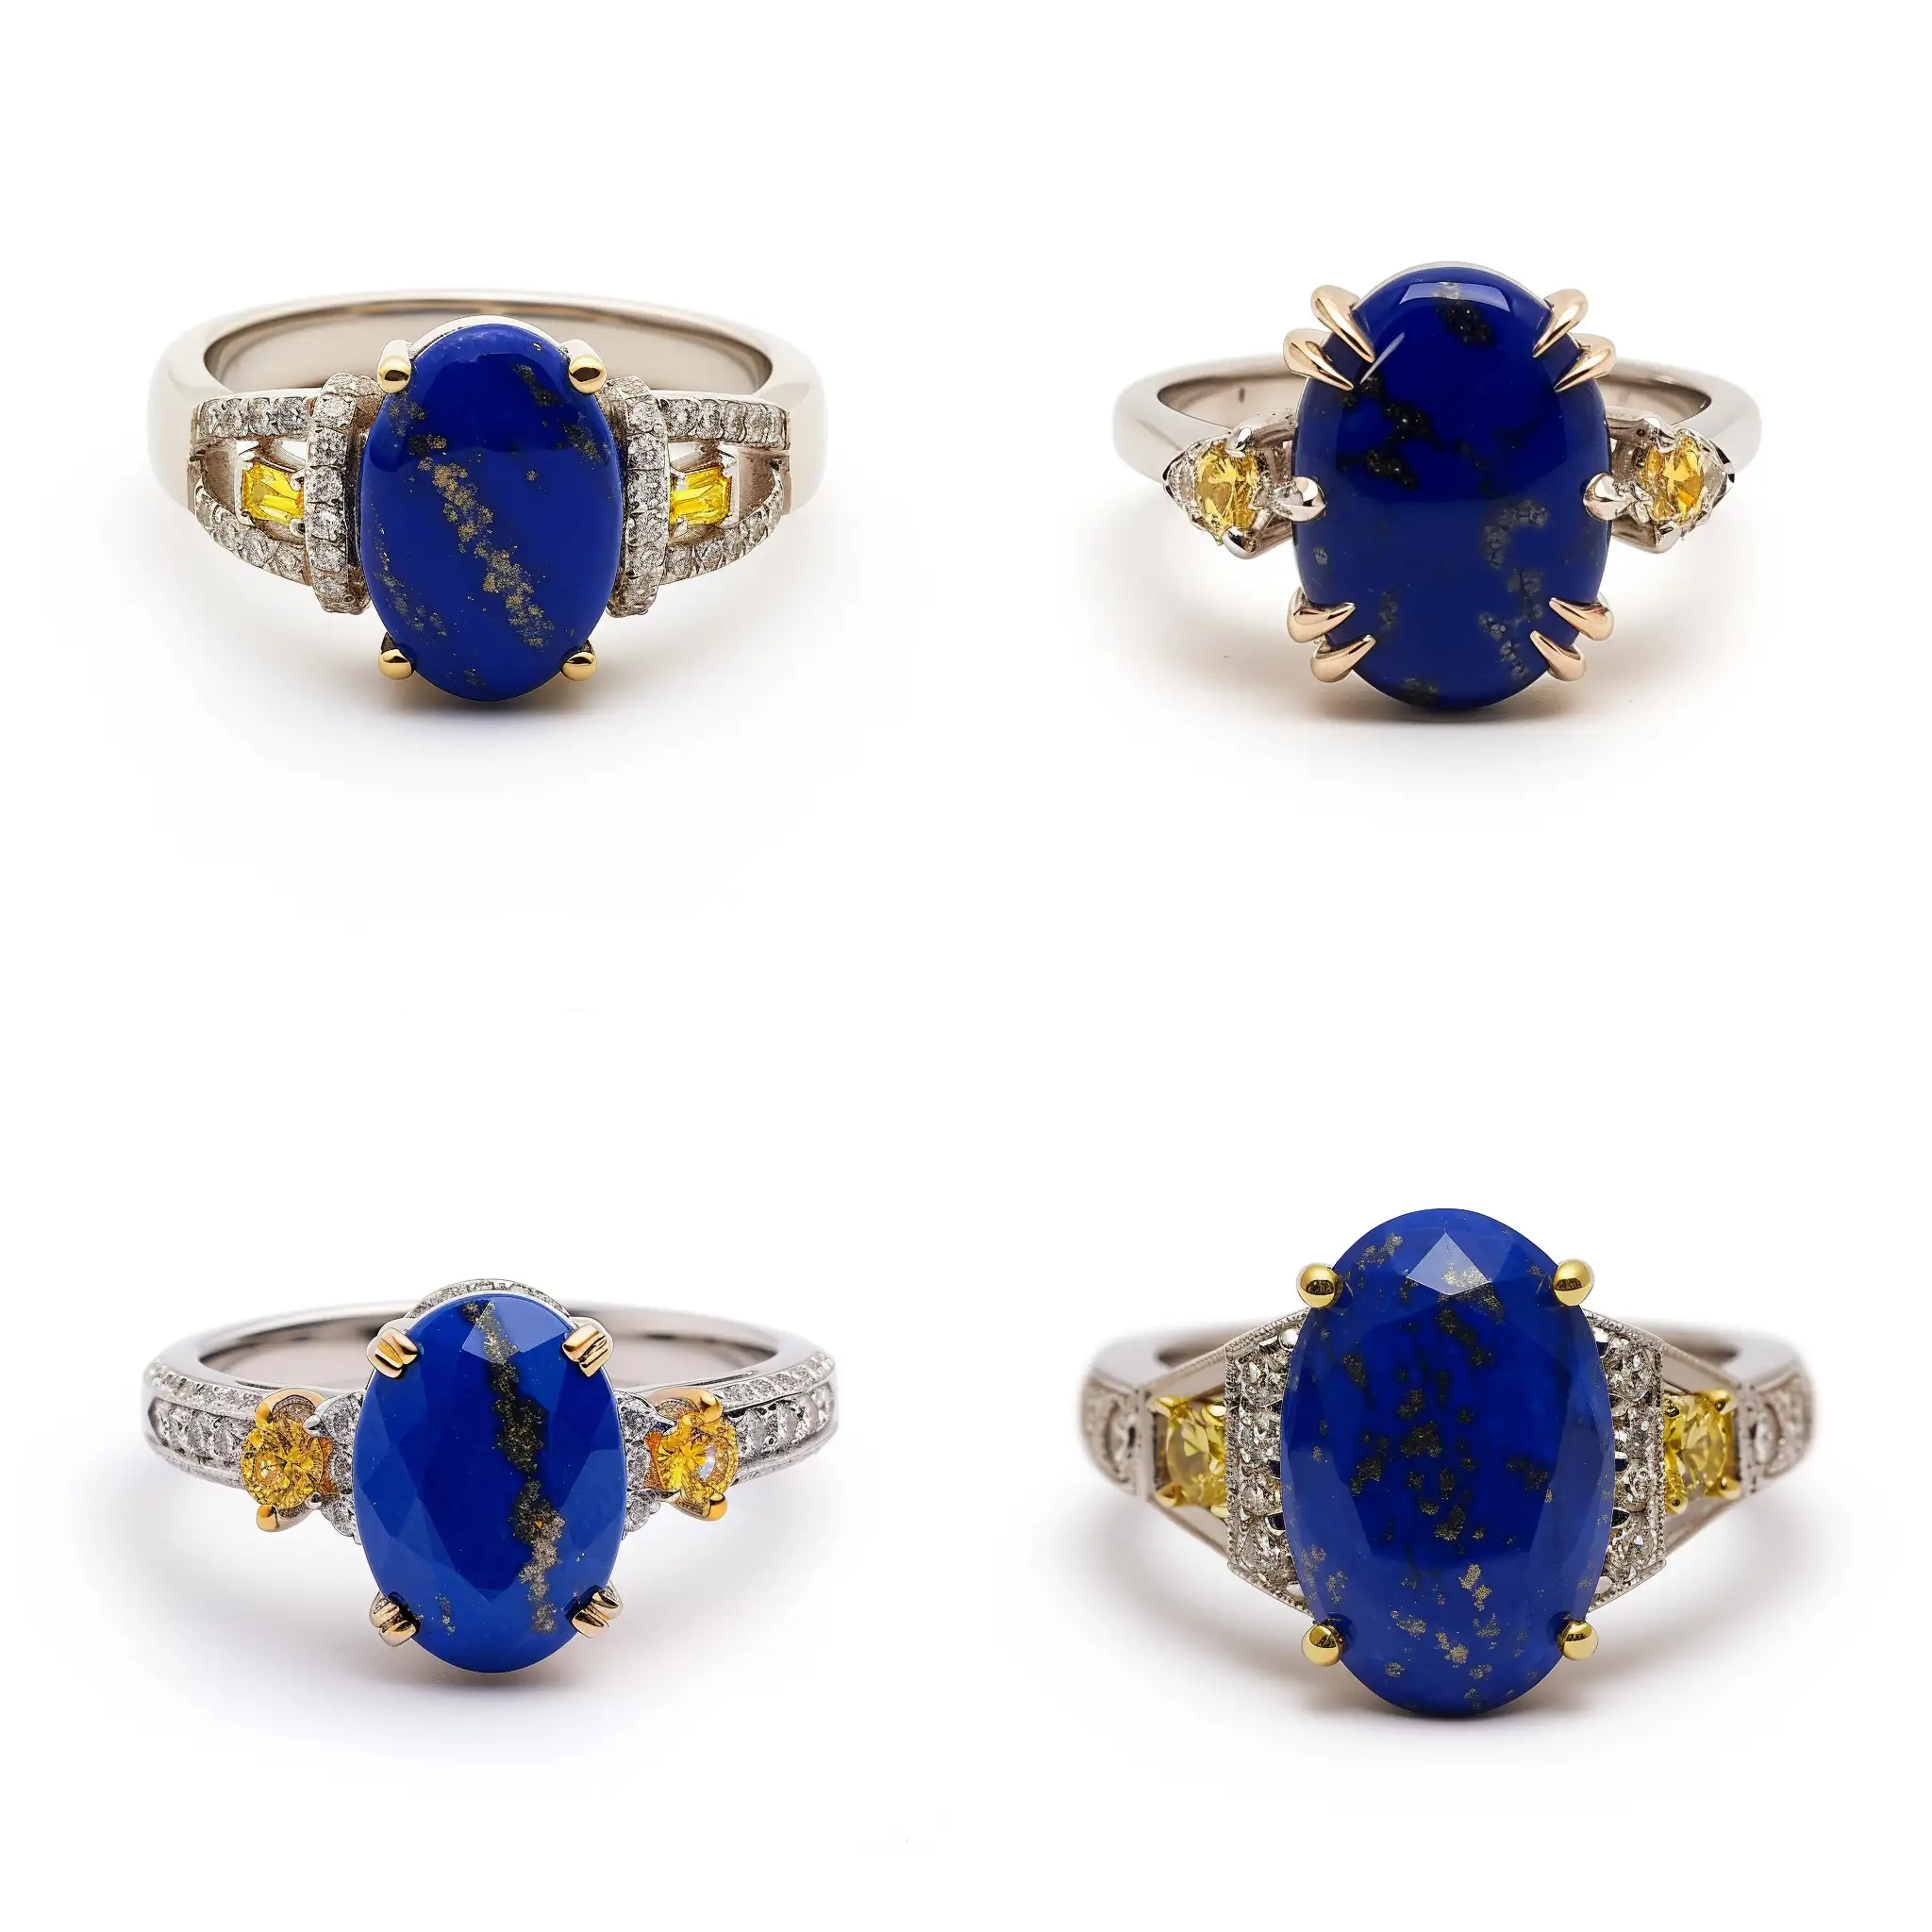 Exquisite-Art-Deco-White-Gold-Ring-with-OvalCut-Lapis-Lazuli-and-Yellow-Diamonds